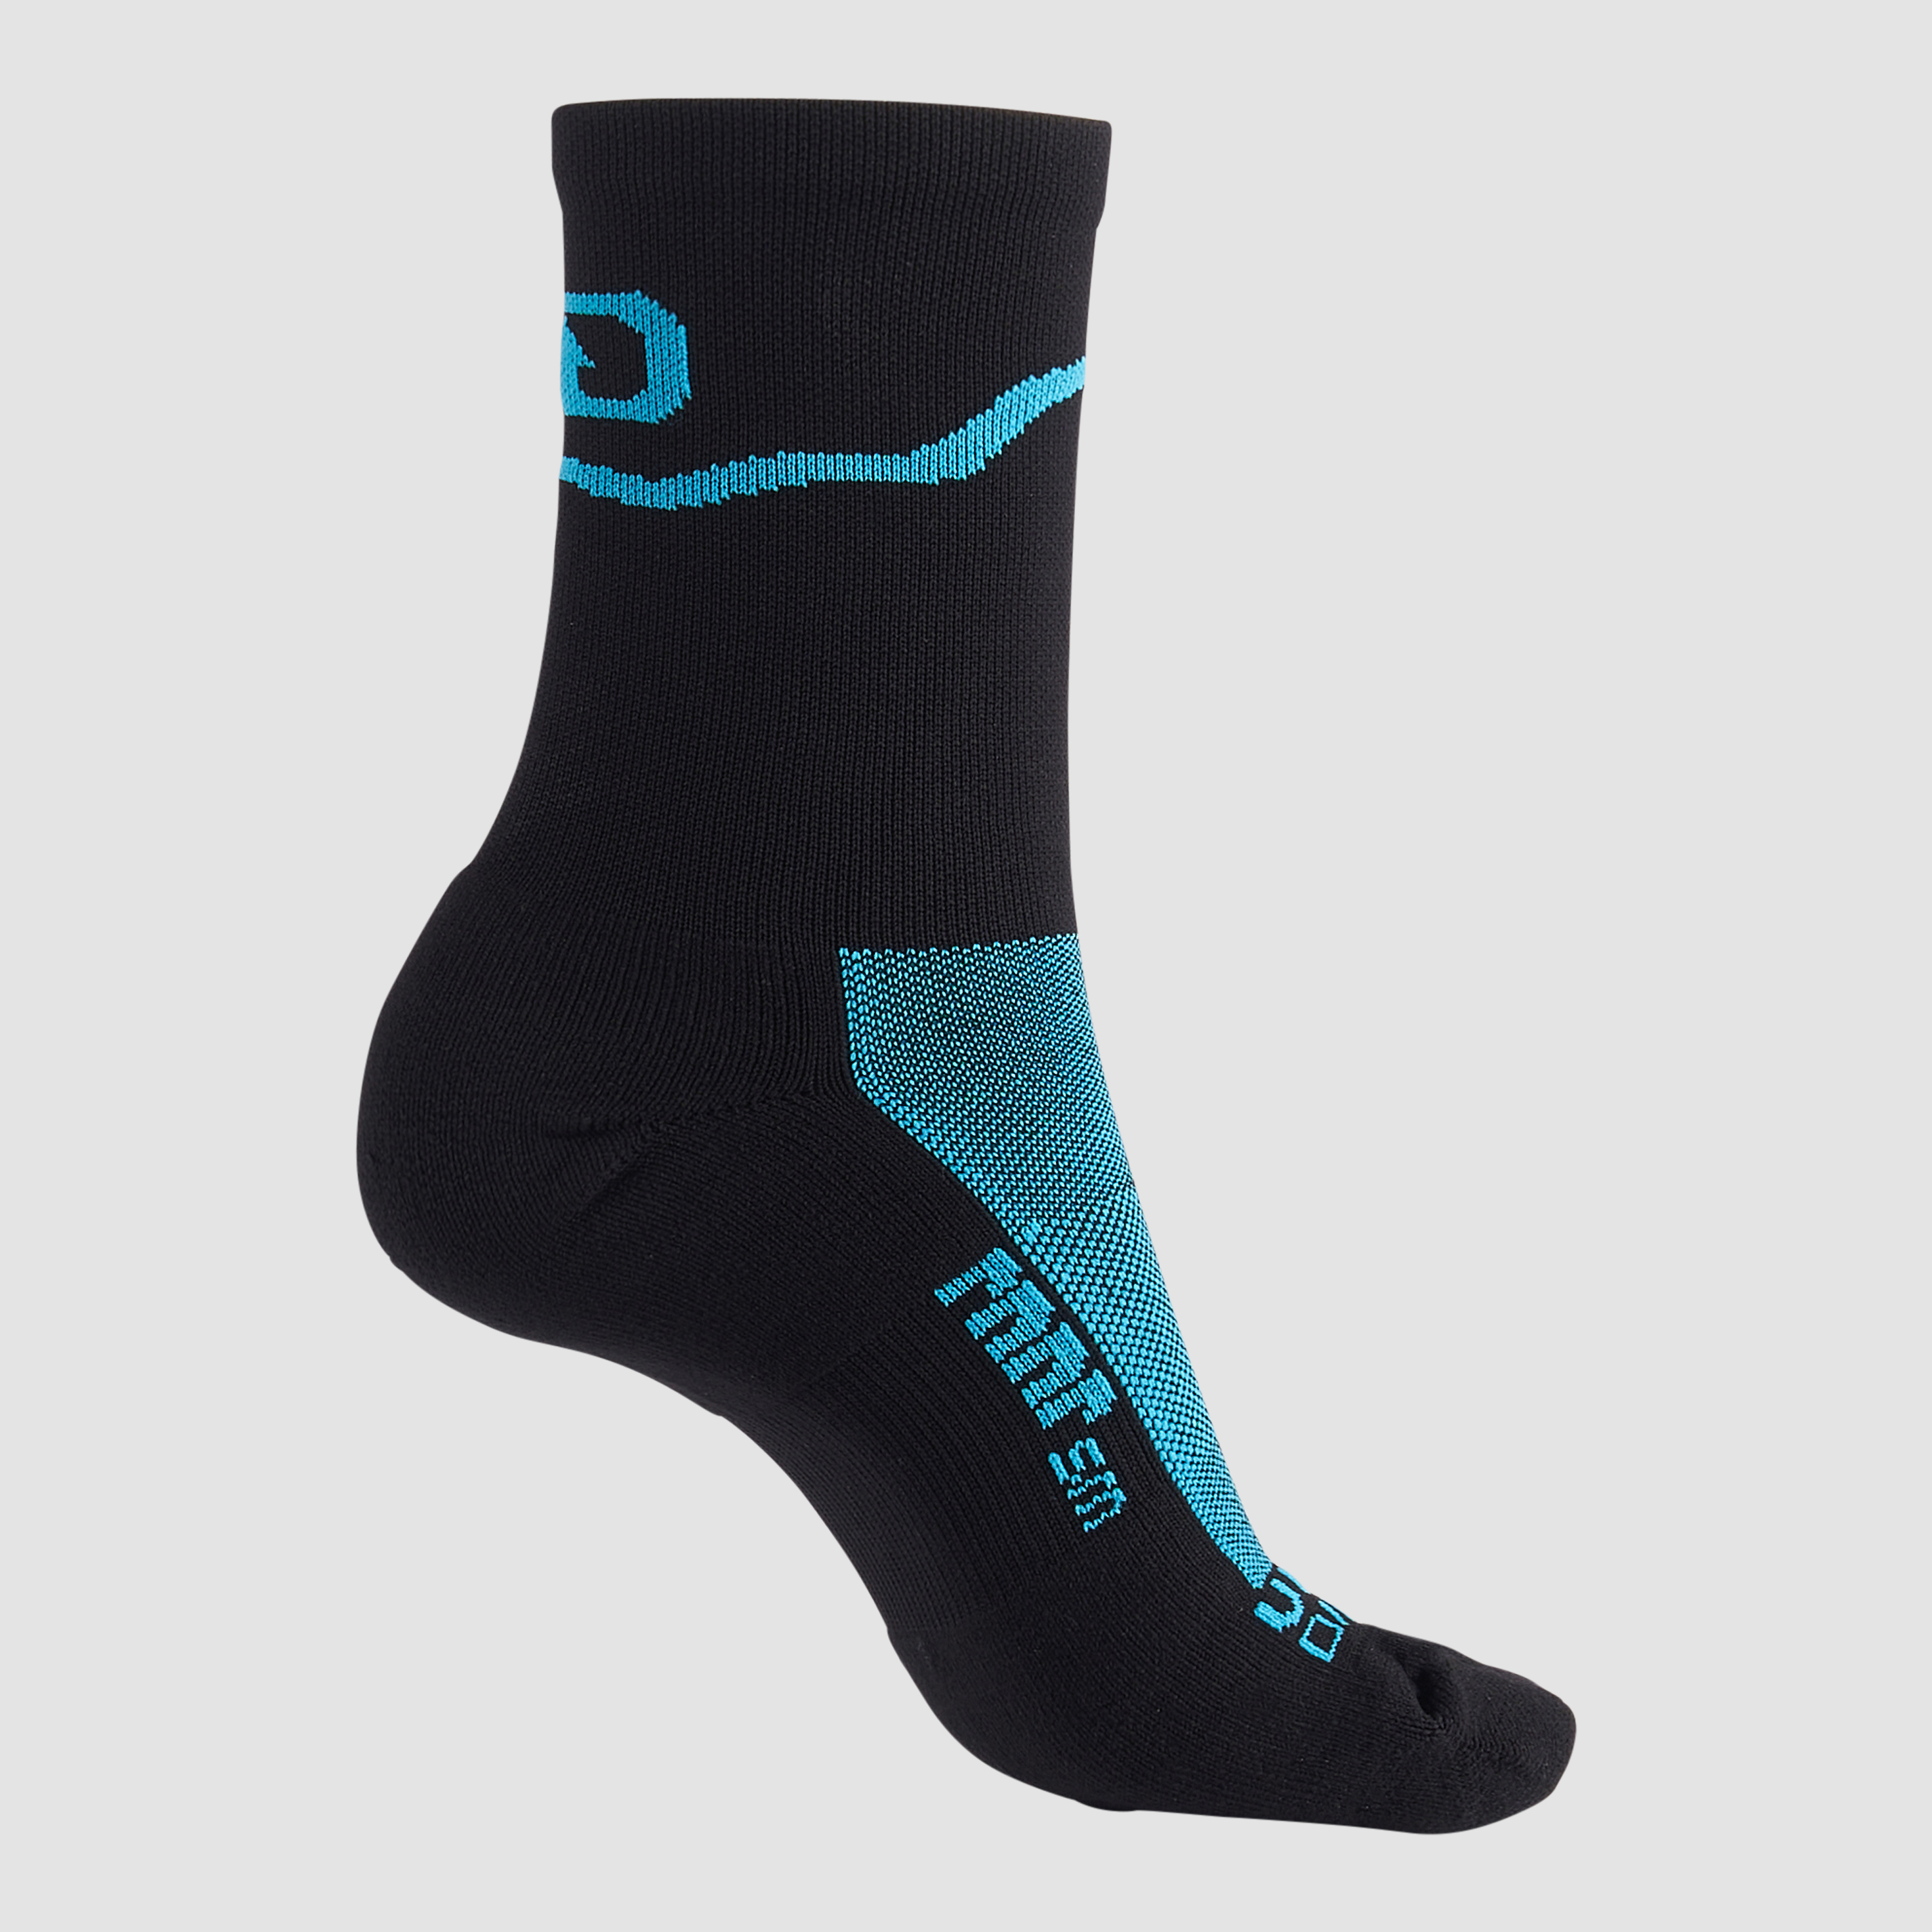 Ultimate Direction UD Micro Crew Sock in Onyx Size L/XL